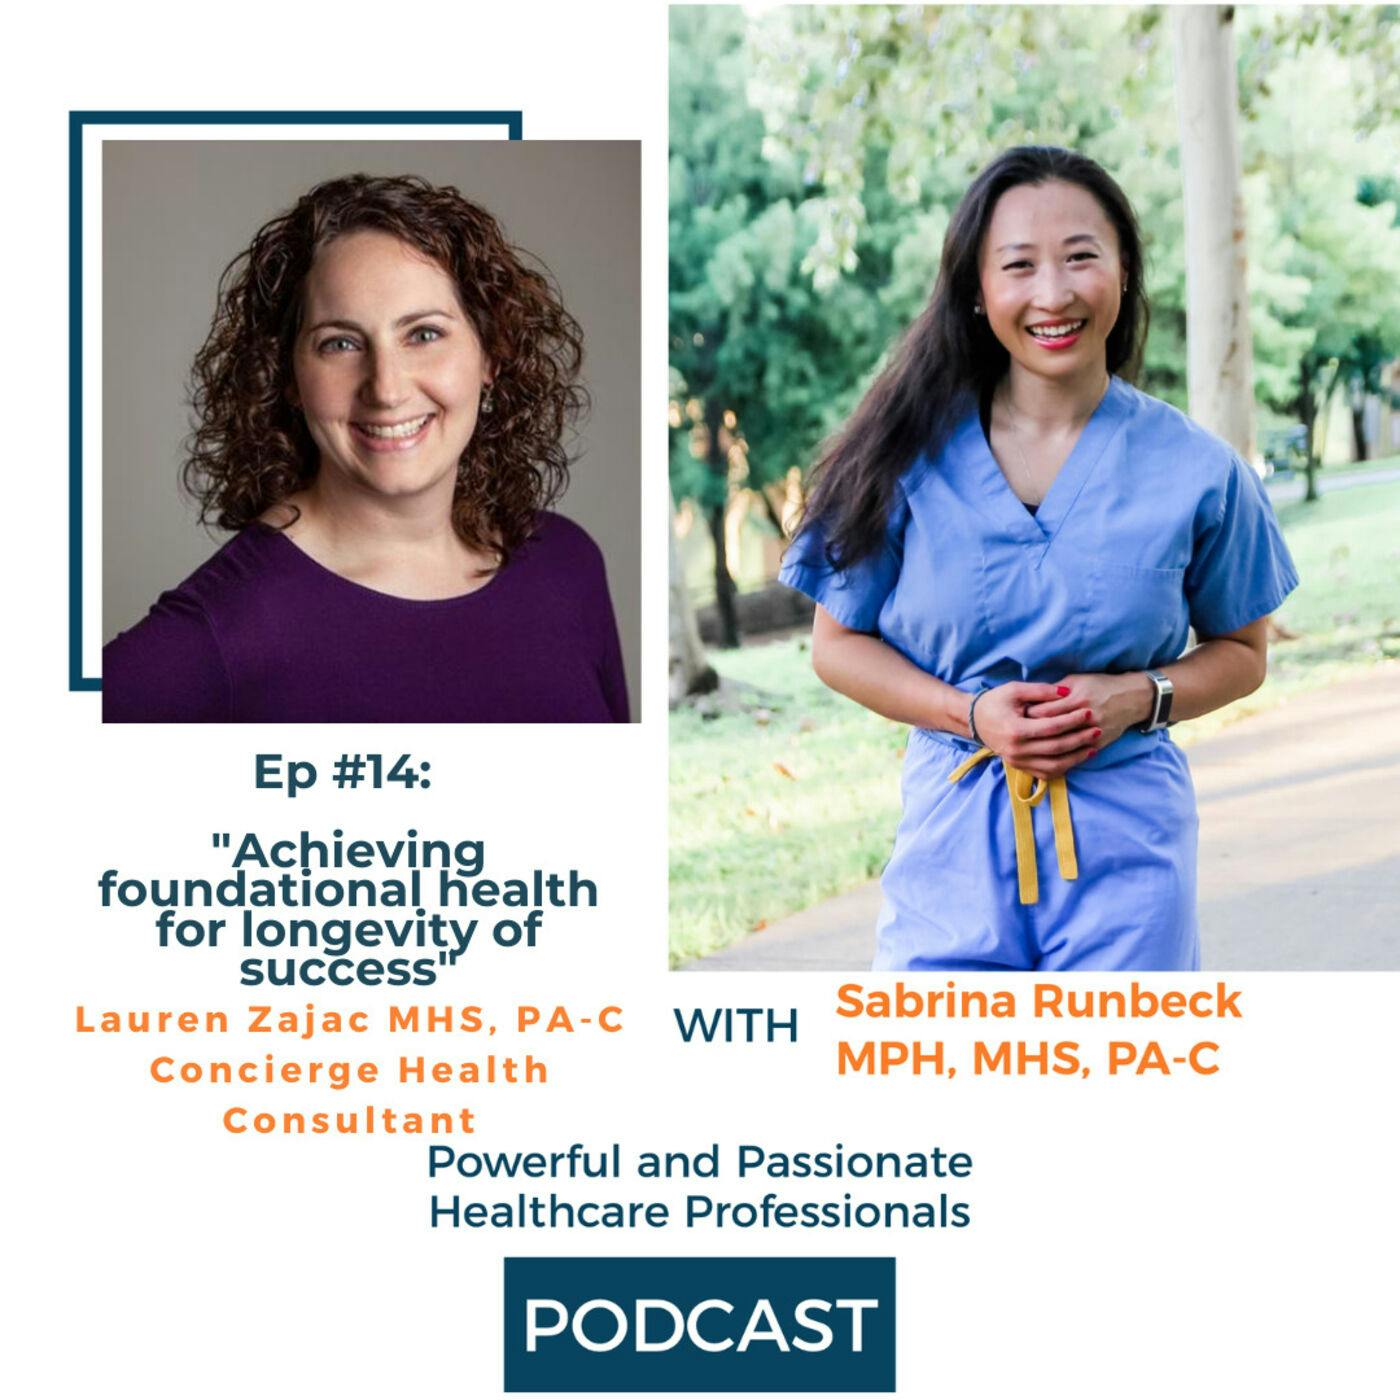 Ep 14 – Achieving Foundational Health for Longevity of Success with Lauren Zajac MHS, PA-C